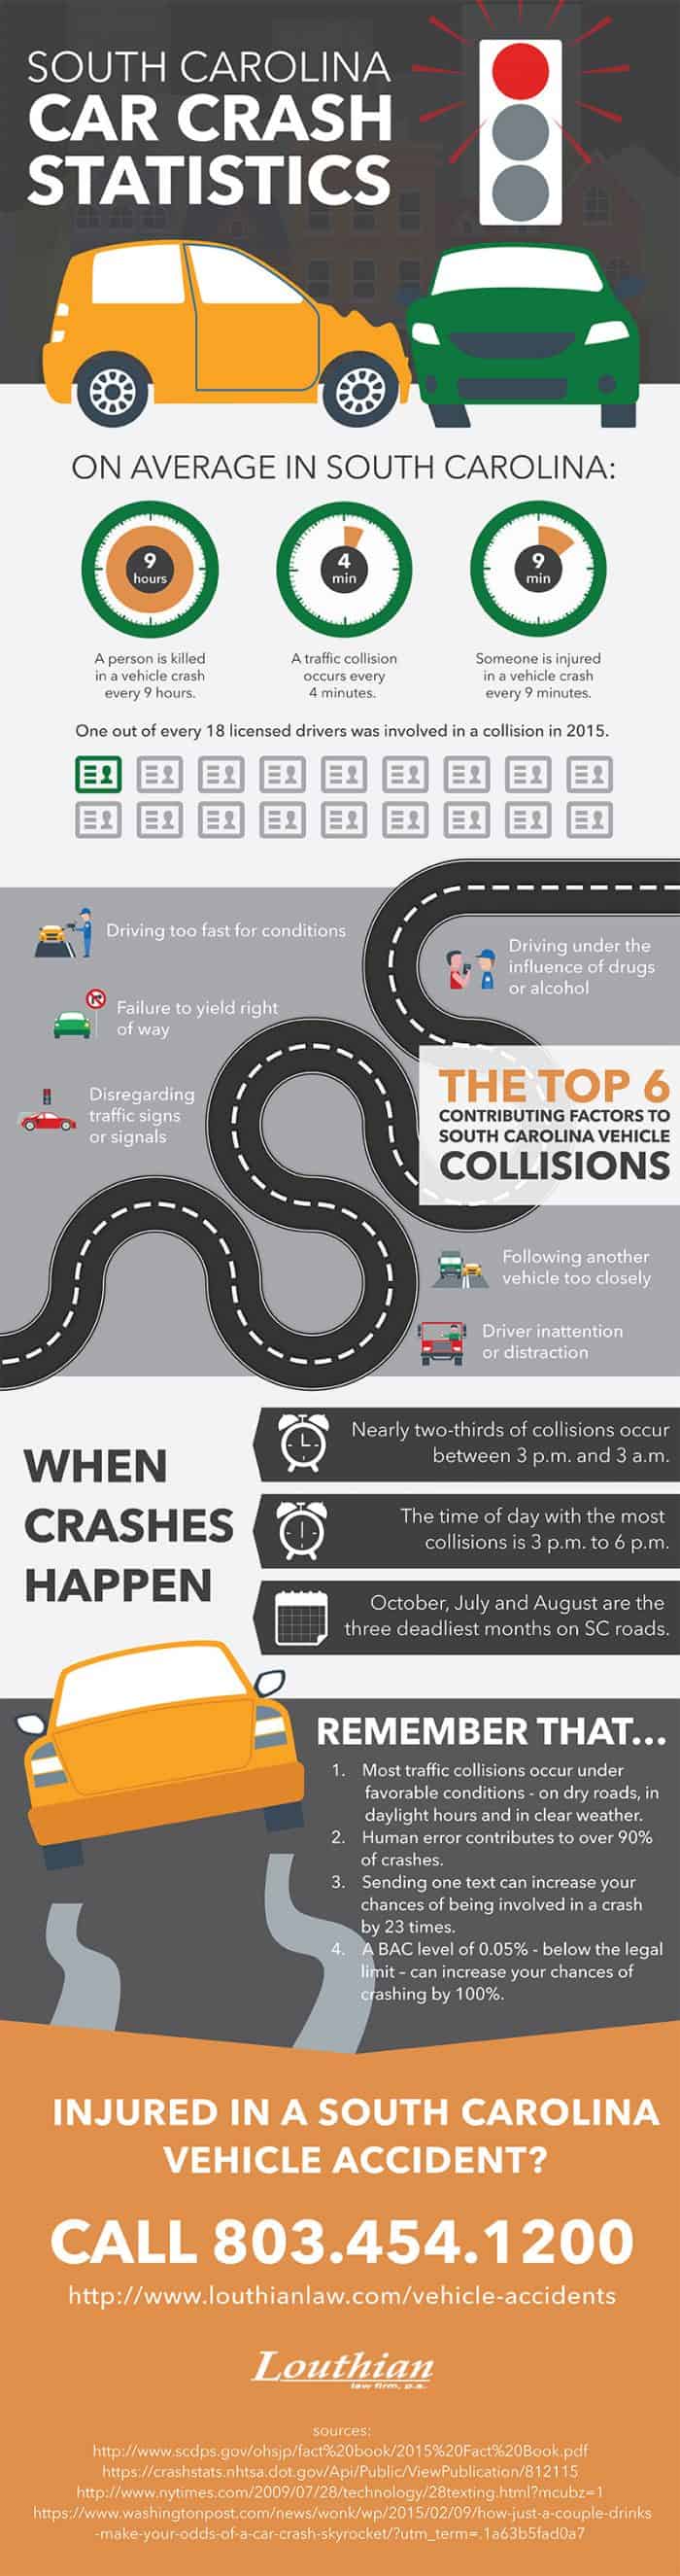 infographic describes frequency of car accidents in the U.S.